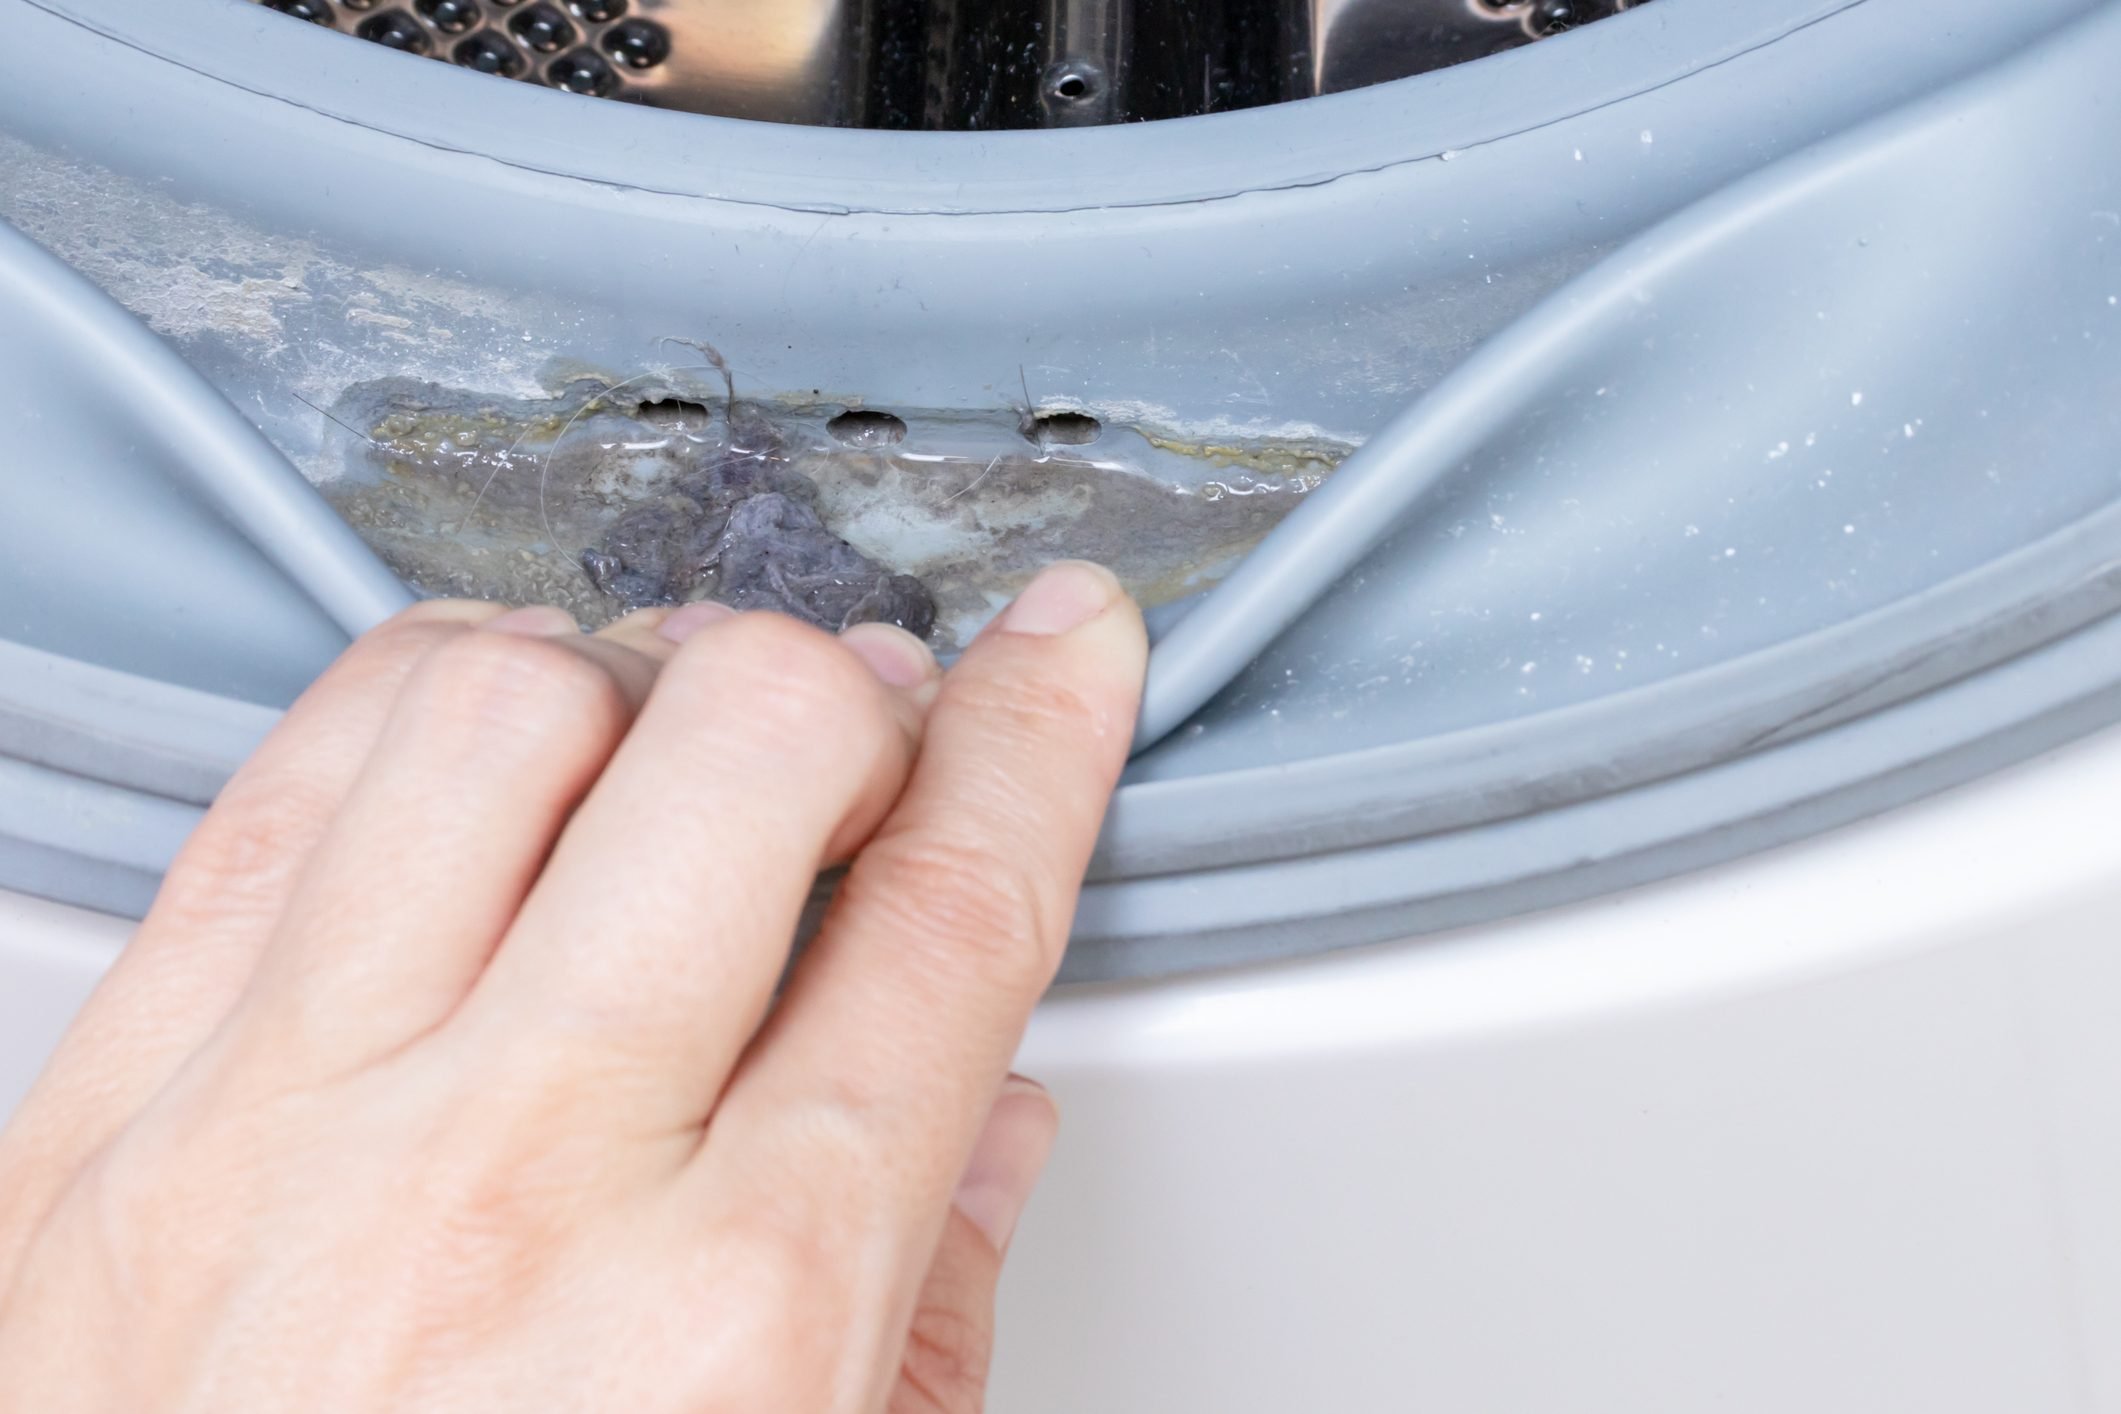 Dirty moldy washing machine sealing rubber and drum close up. Mold, dirt and limescale in washing machine. Home appliances periodic maintenance